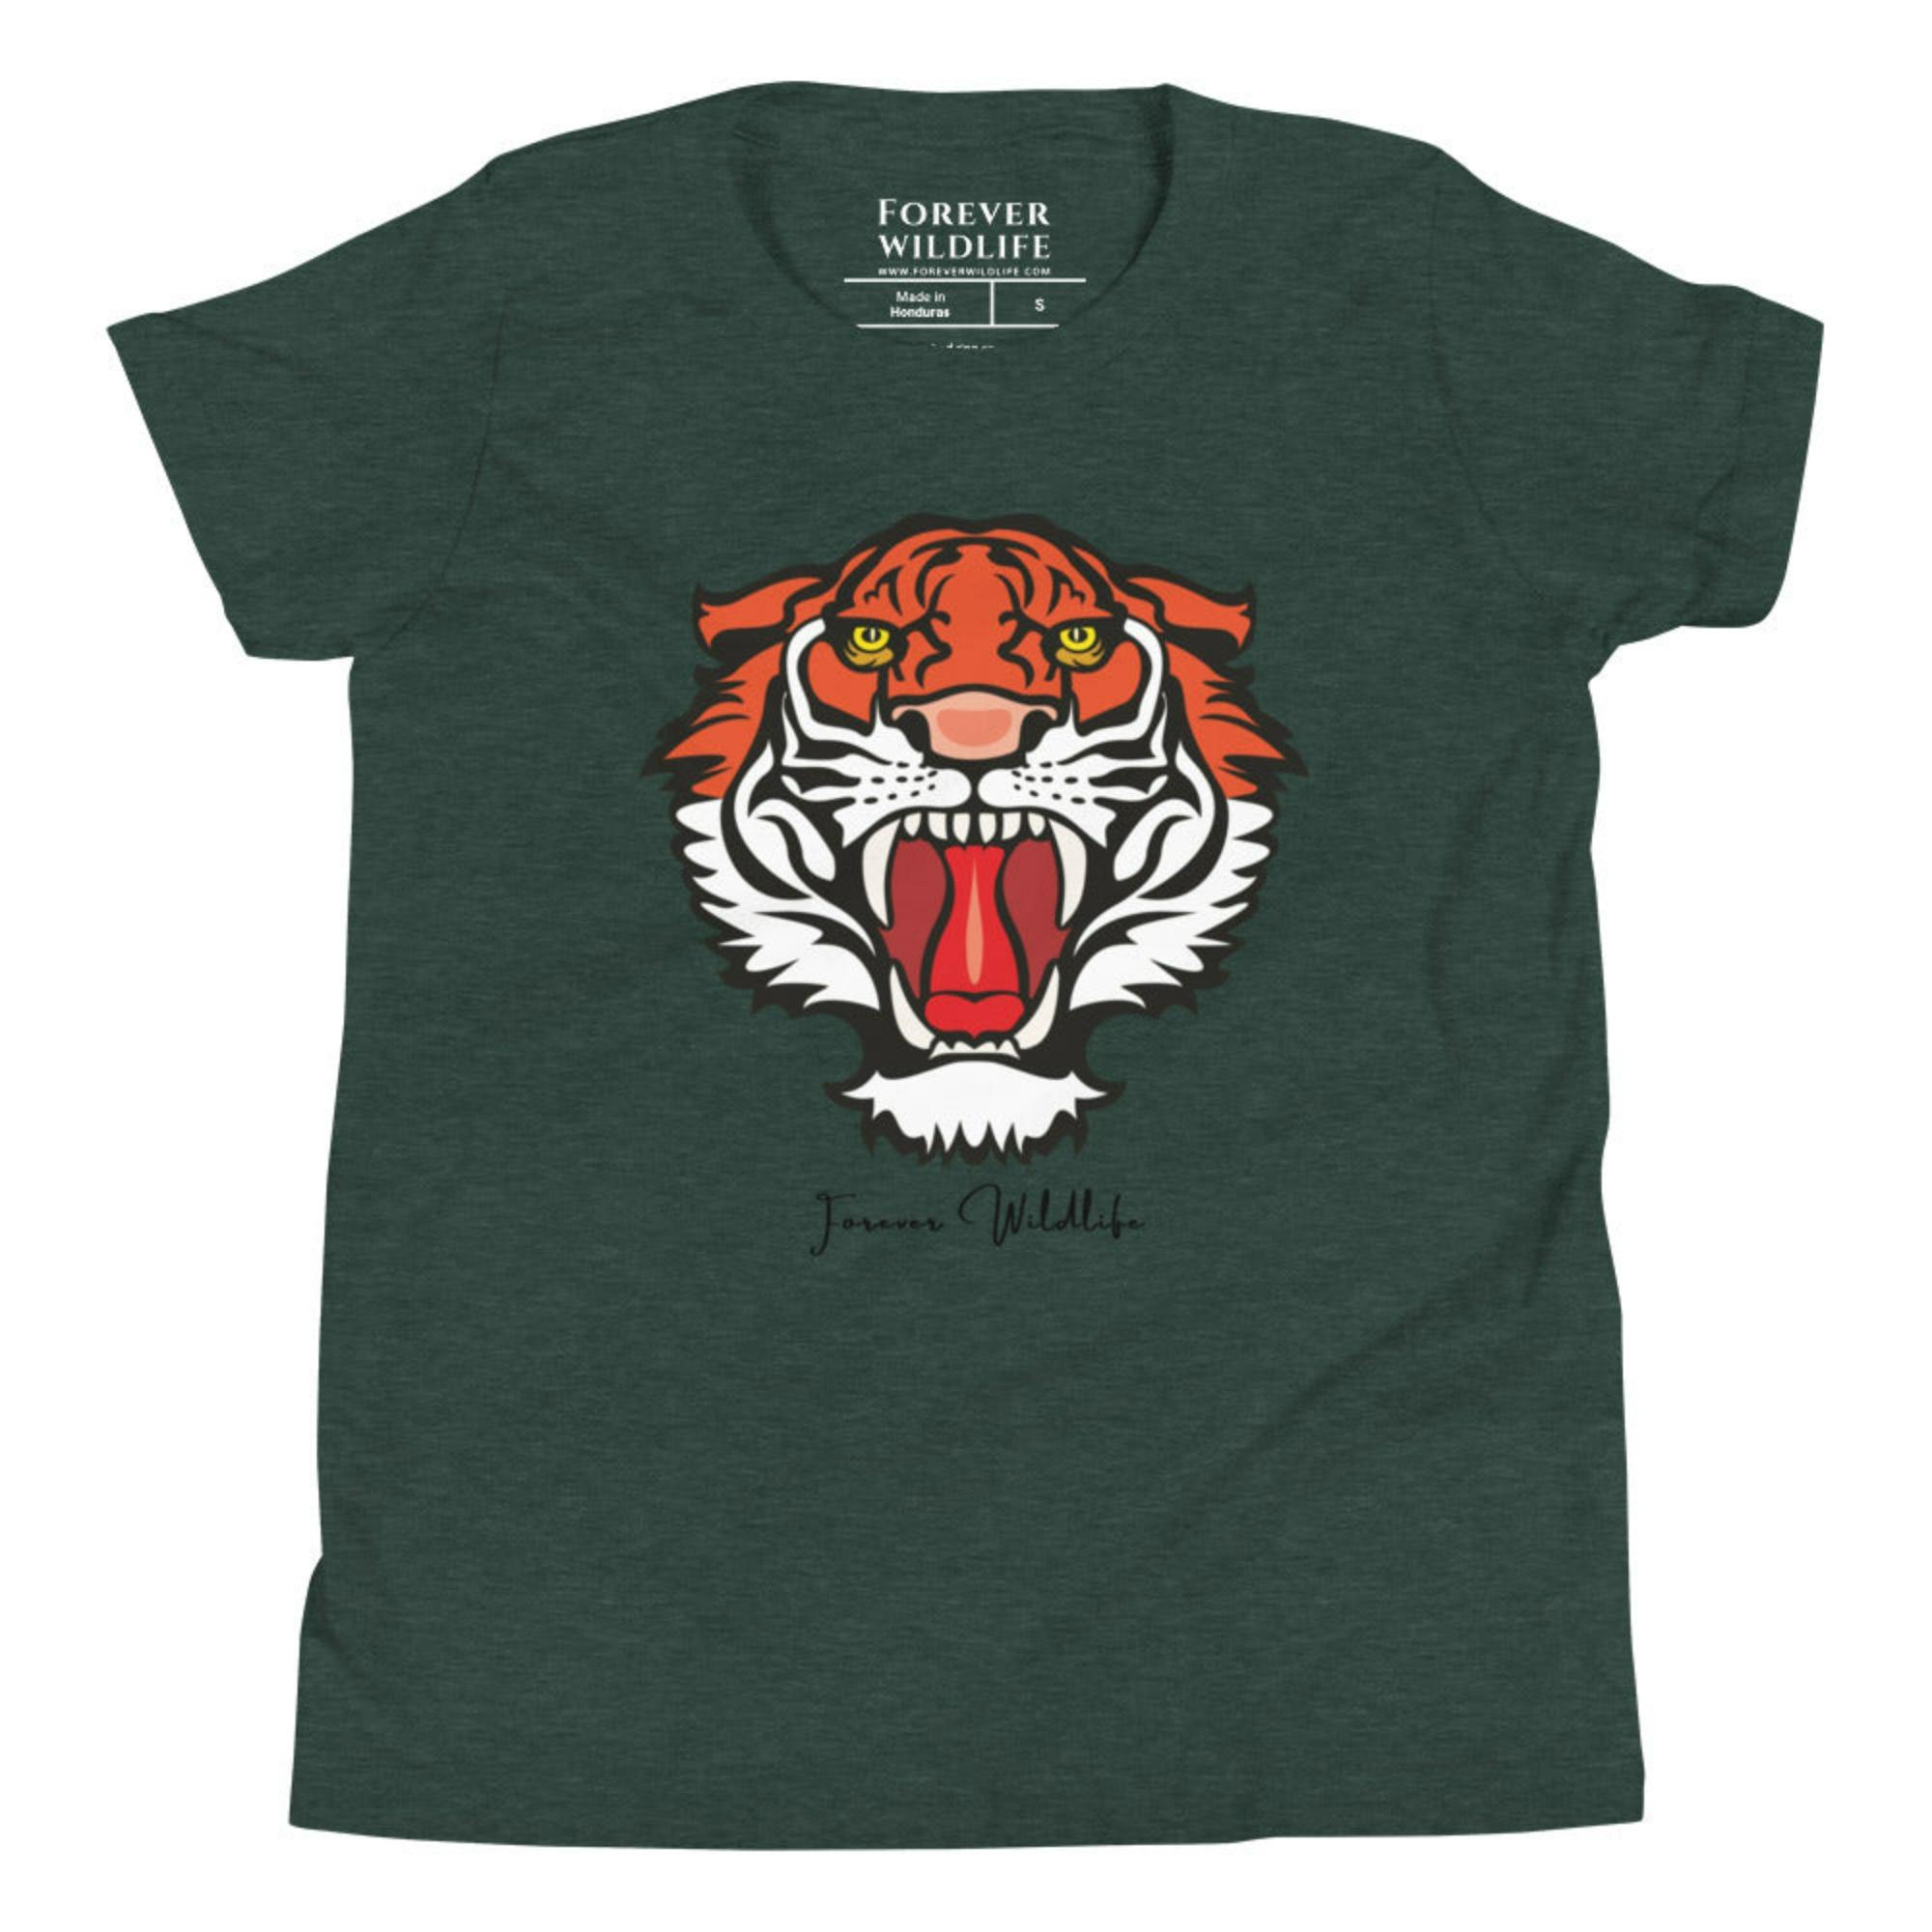 Forest Heather Youth T-Shirt with Tiger graphic as part of Wildlife T Shirts, Wildlife Clothing & Apparel by Forever Wildlife